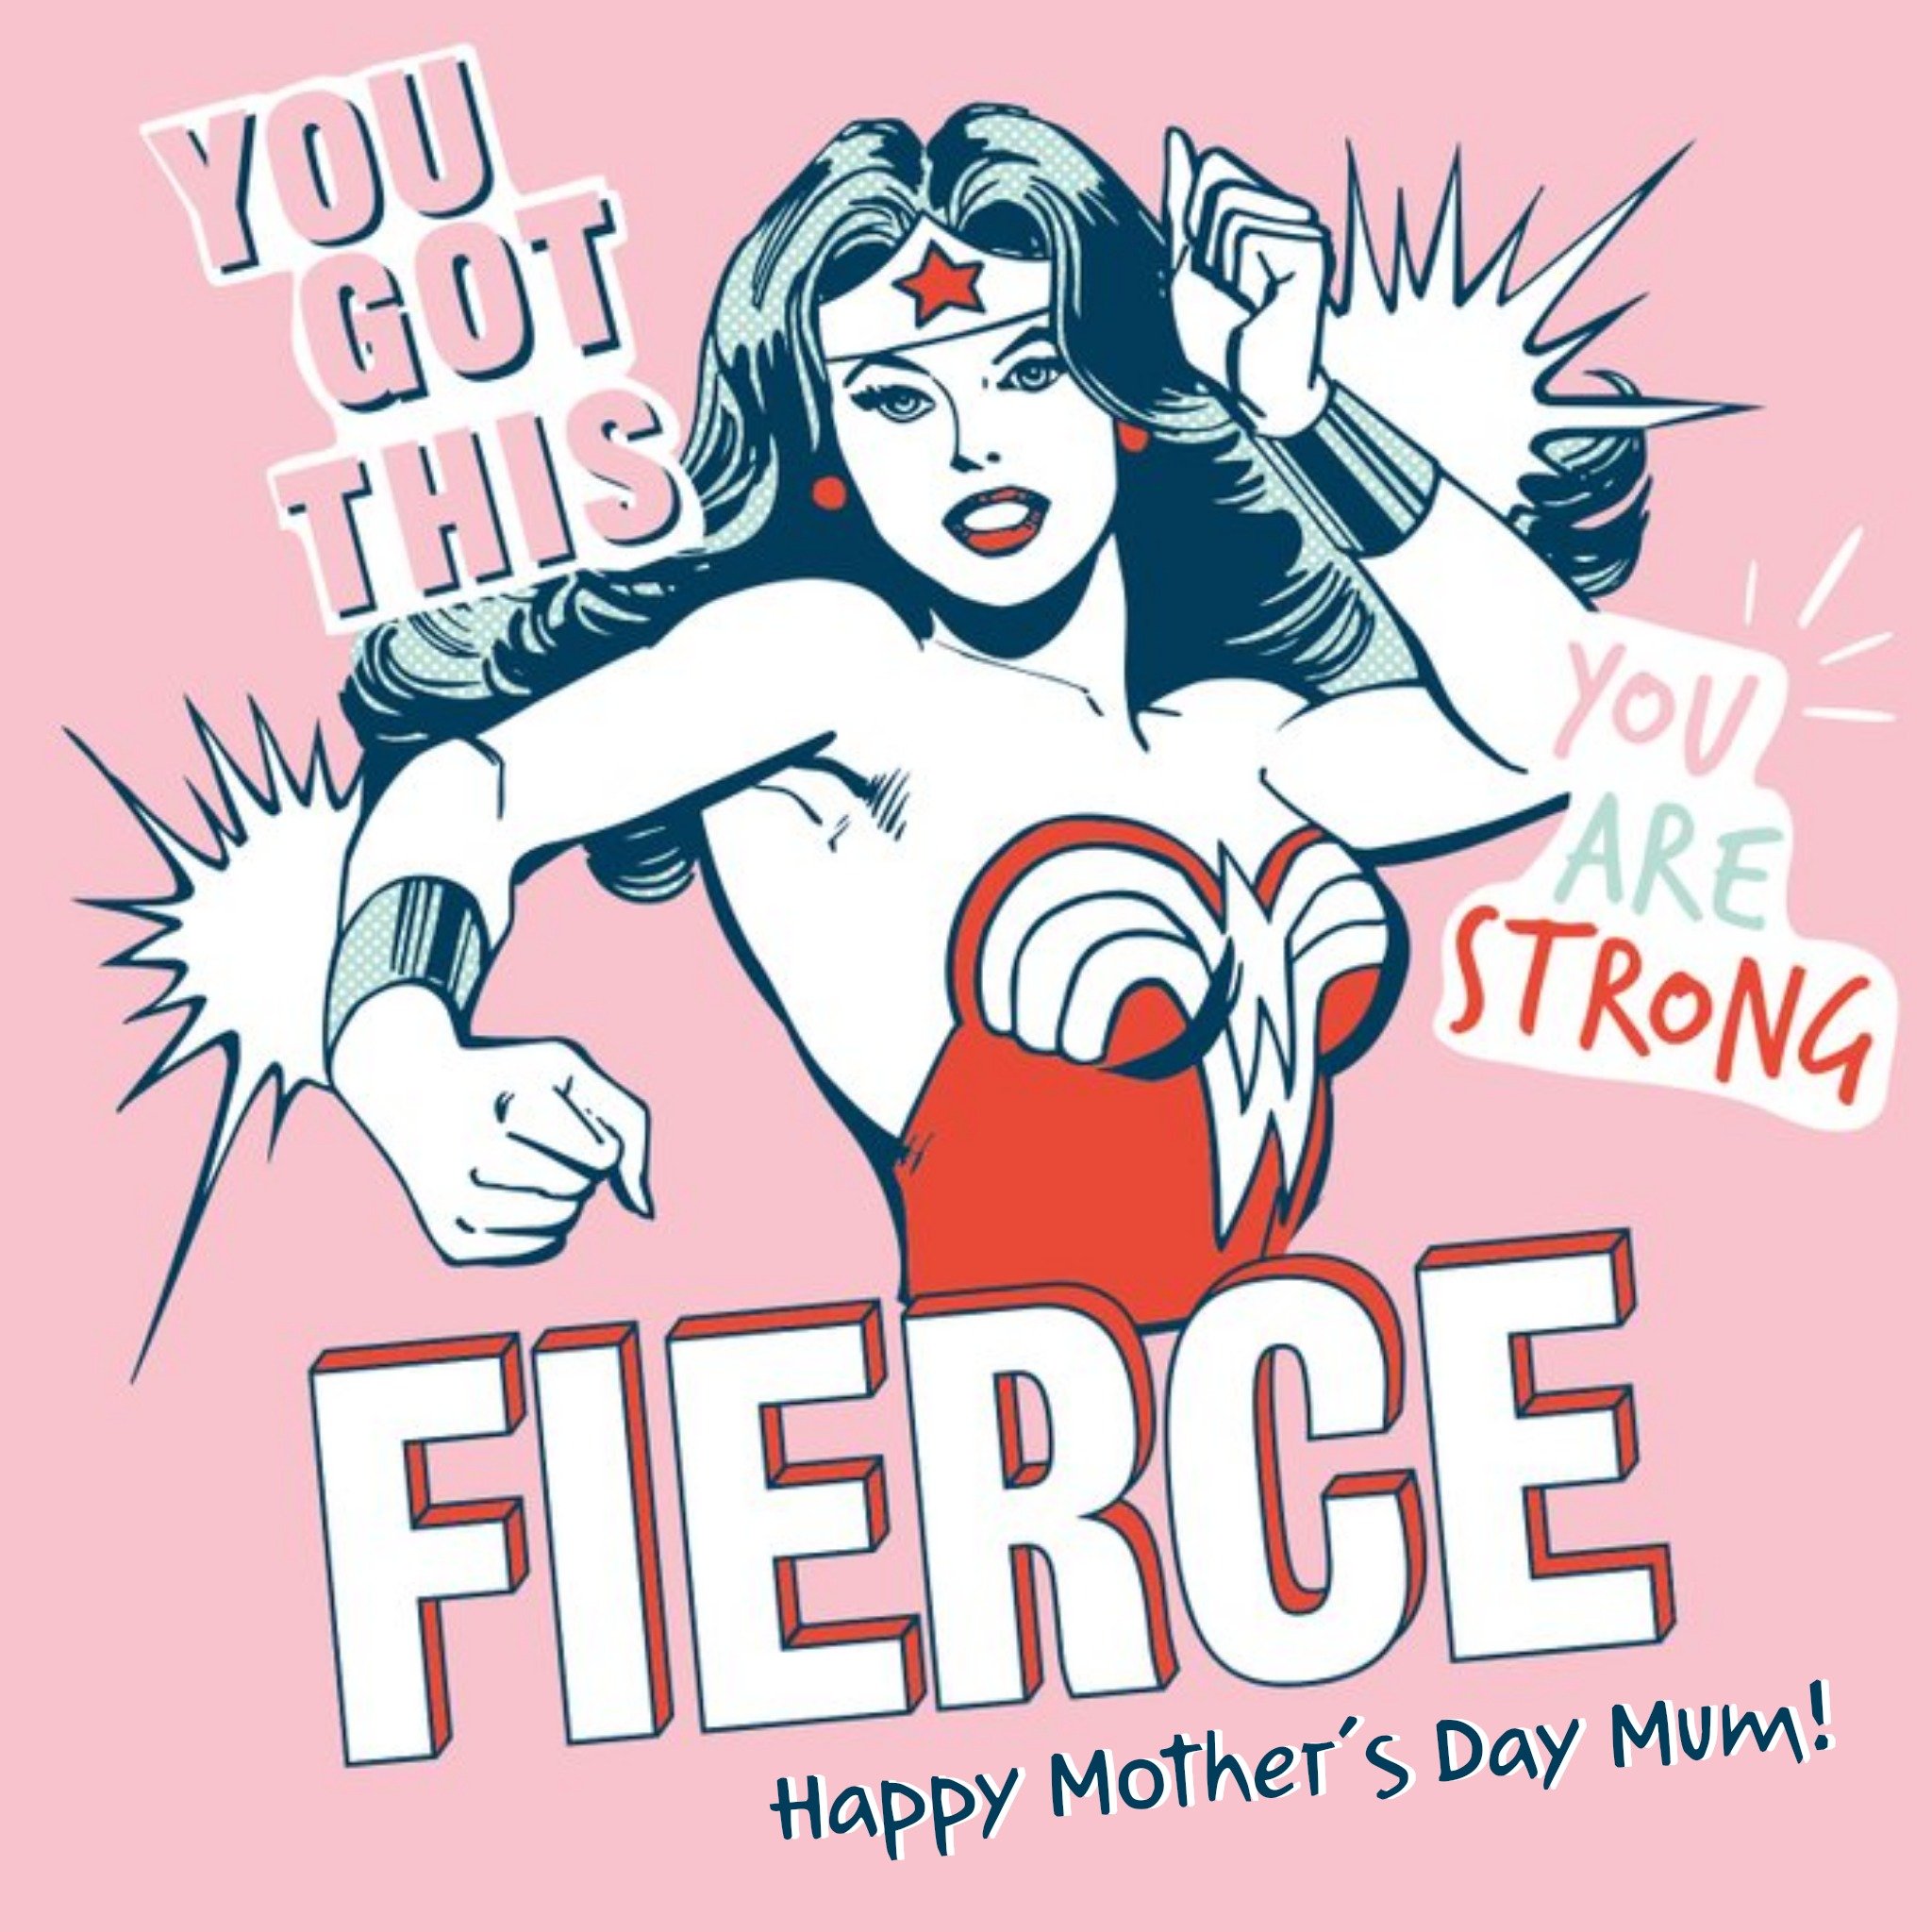 Moonpig You Are Stong Fierce Wonder Woman Mother's Day Card, Large